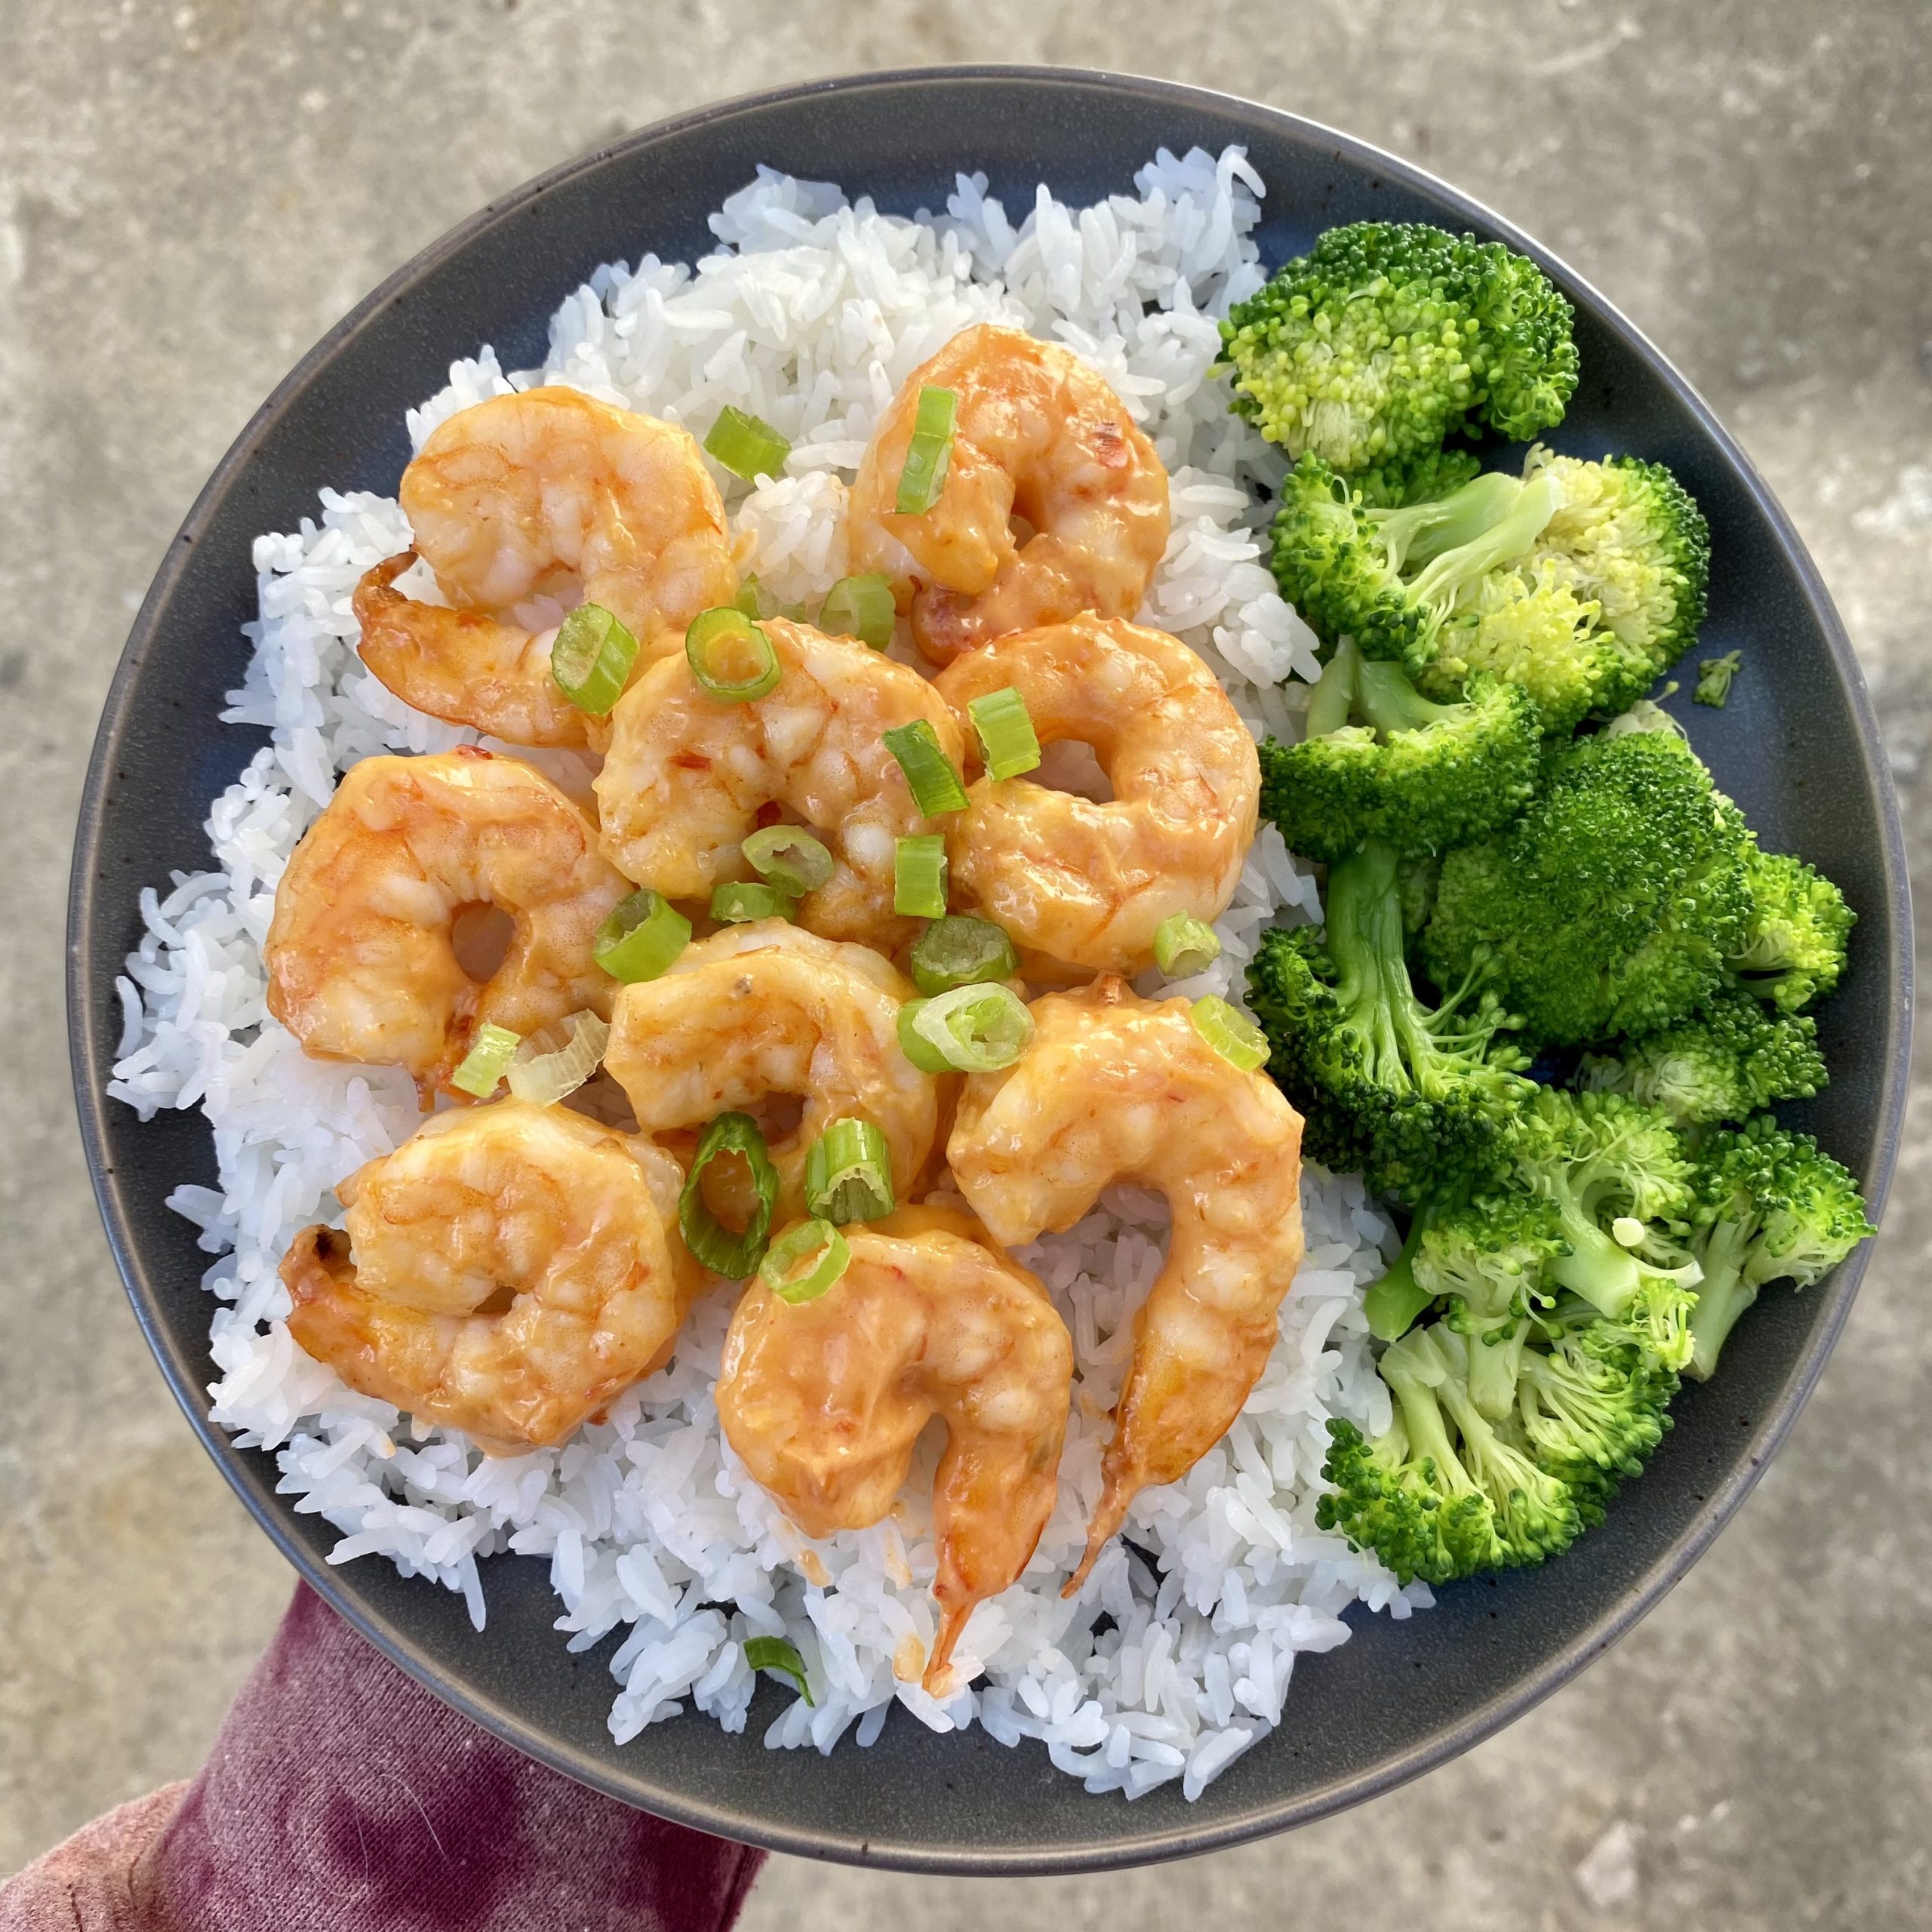 Plate of shrimp and broccoli over rice